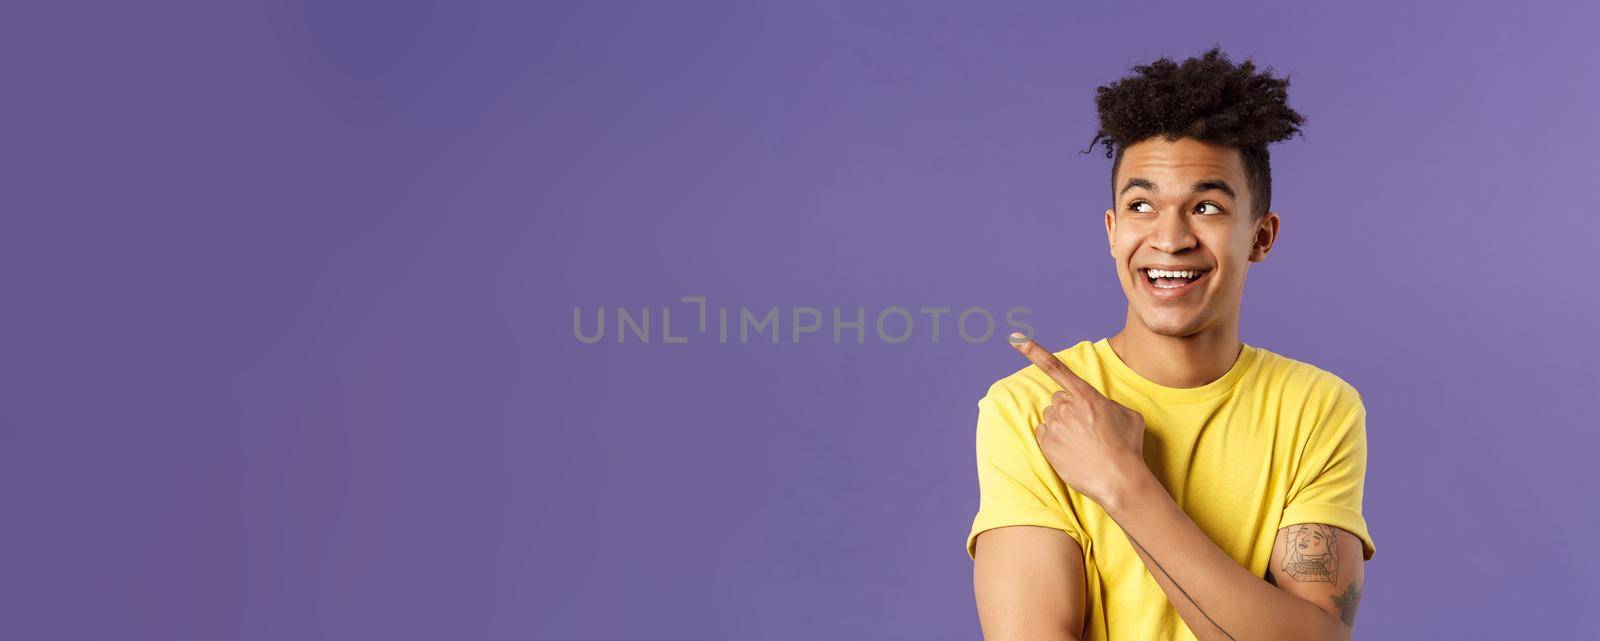 Close-up portrait of funny cute hispanic man with dreads, laughing and smiling at something, pointing looking upper left corner enthusiastic expression, purple background by Benzoix